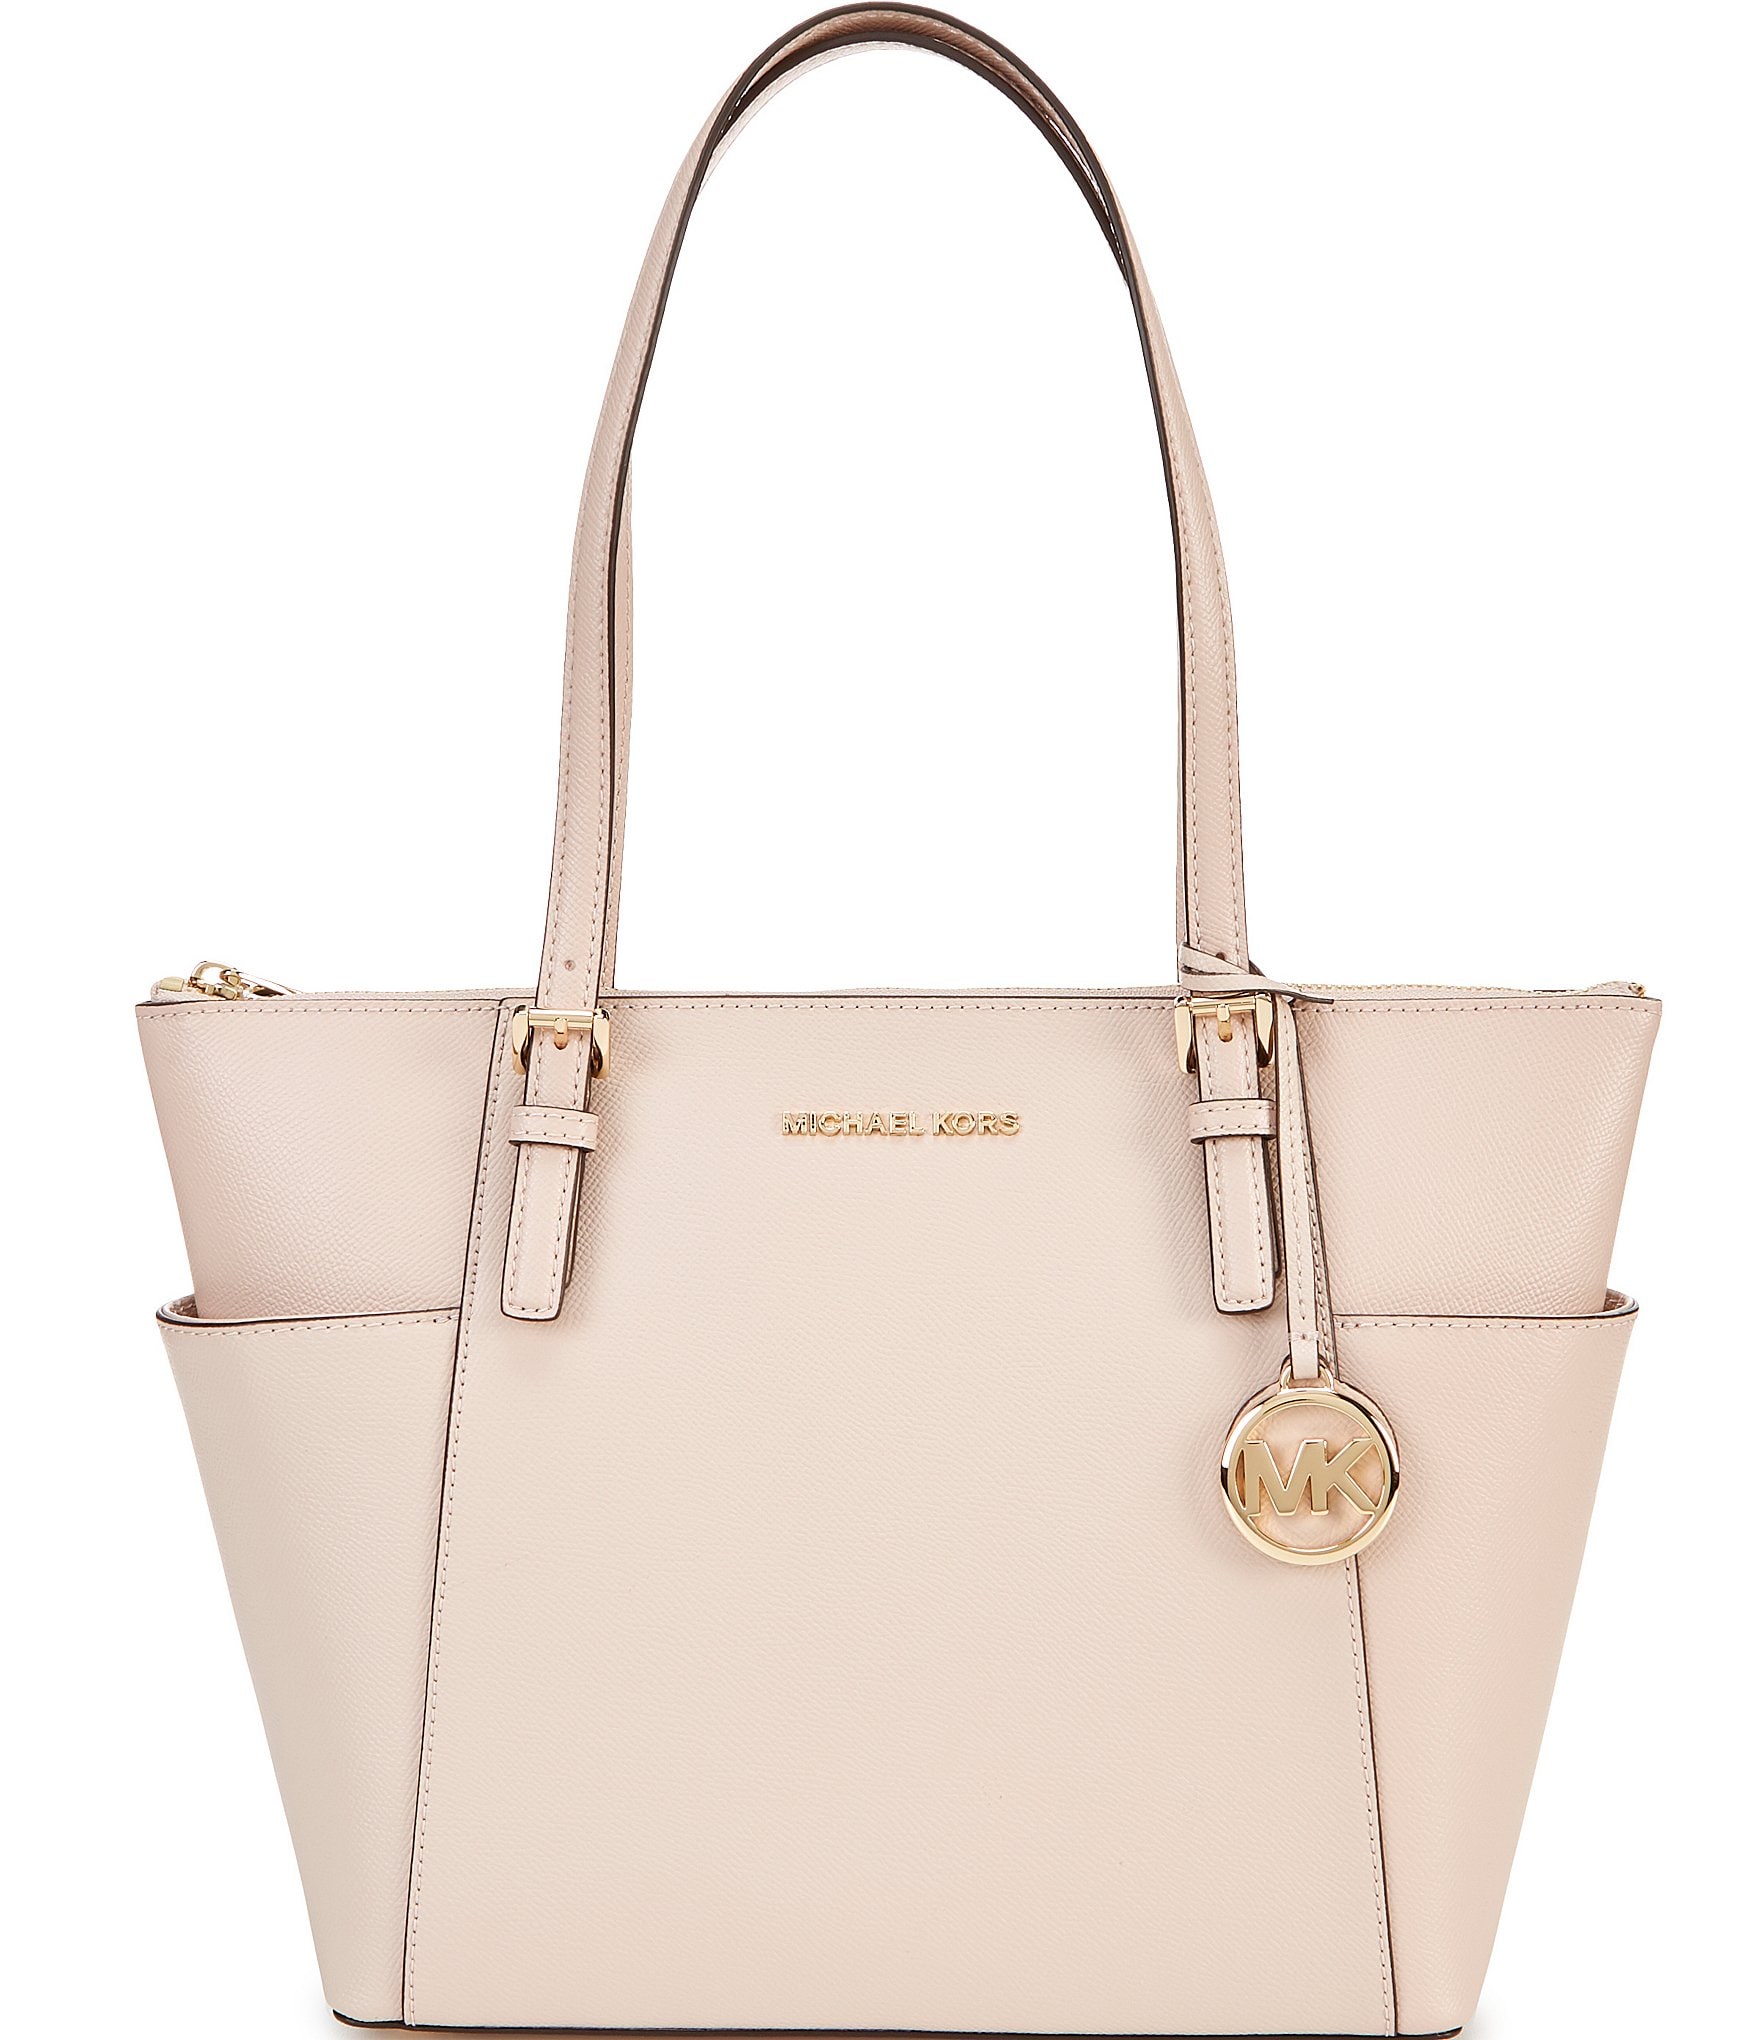 Michael Kors Purse Sale Dillards | Confederated Tribes of the Umatilla Indian Reservation